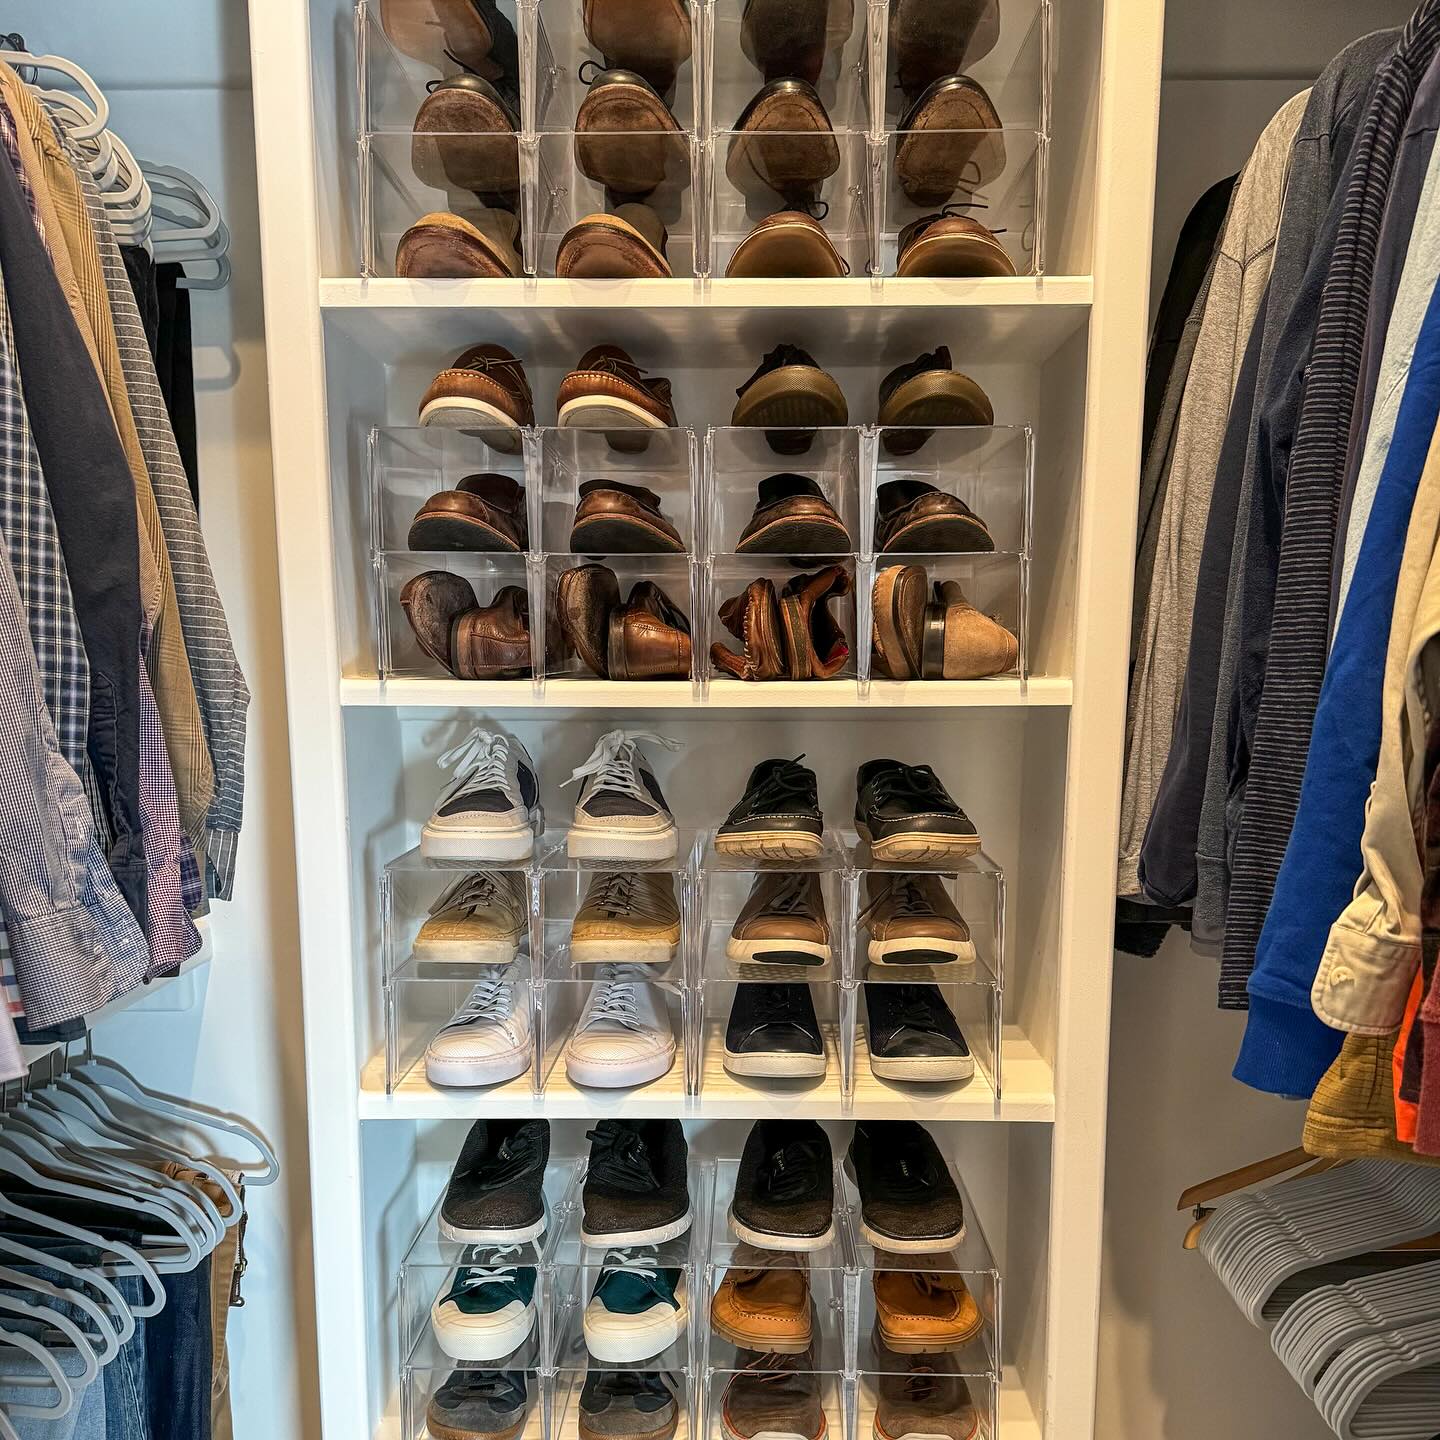 acrylic stacking shoe bins in a walk-in-closet for maximizing storage & keeping shoes well organized.